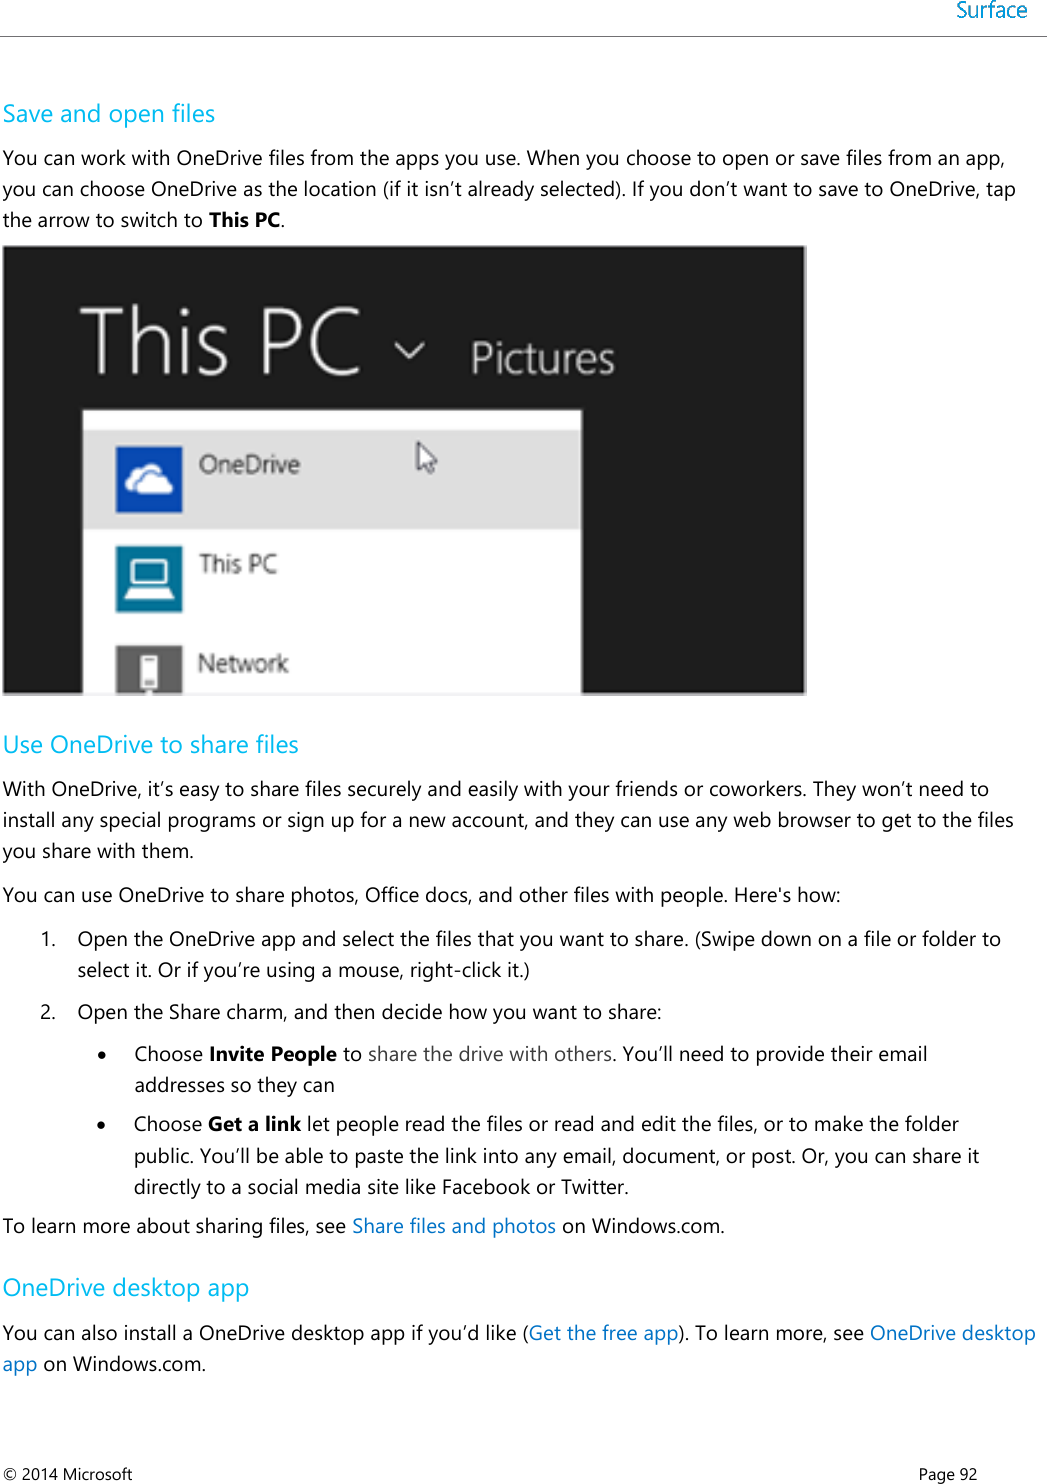  © 2014 Microsoft      Page 92  Save and open files   You can work with OneDrive files from the apps you use. When you choose to open or save files from an app, you can choose OneDrive as the location (if it isn’t already selected). If you don’t want to save to OneDrive, tap the arrow to switch to This PC.   Use OneDrive to share files With OneDrive, it’s easy to share files securely and easily with your friends or coworkers. They won’t need to install any special programs or sign up for a new account, and they can use any web browser to get to the files you share with them.  You can use OneDrive to share photos, Office docs, and other files with people. Here&apos;s how: 1. Open the OneDrive app and select the files that you want to share. (Swipe down on a file or folder to select it. Or if you’re using a mouse, right-click it.) 2. Open the Share charm, and then decide how you want to share:   Choose Invite People to share the drive with others. You’ll need to provide their email addresses so they can  Choose Get a link let people read the files or read and edit the files, or to make the folder public. You’ll be able to paste the link into any email, document, or post. Or, you can share it directly to a social media site like Facebook or Twitter. To learn more about sharing files, see Share files and photos on Windows.com. OneDrive desktop app You can also install a OneDrive desktop app if you’d like (Get the free app). To learn more, see OneDrive desktop app on Windows.com.  